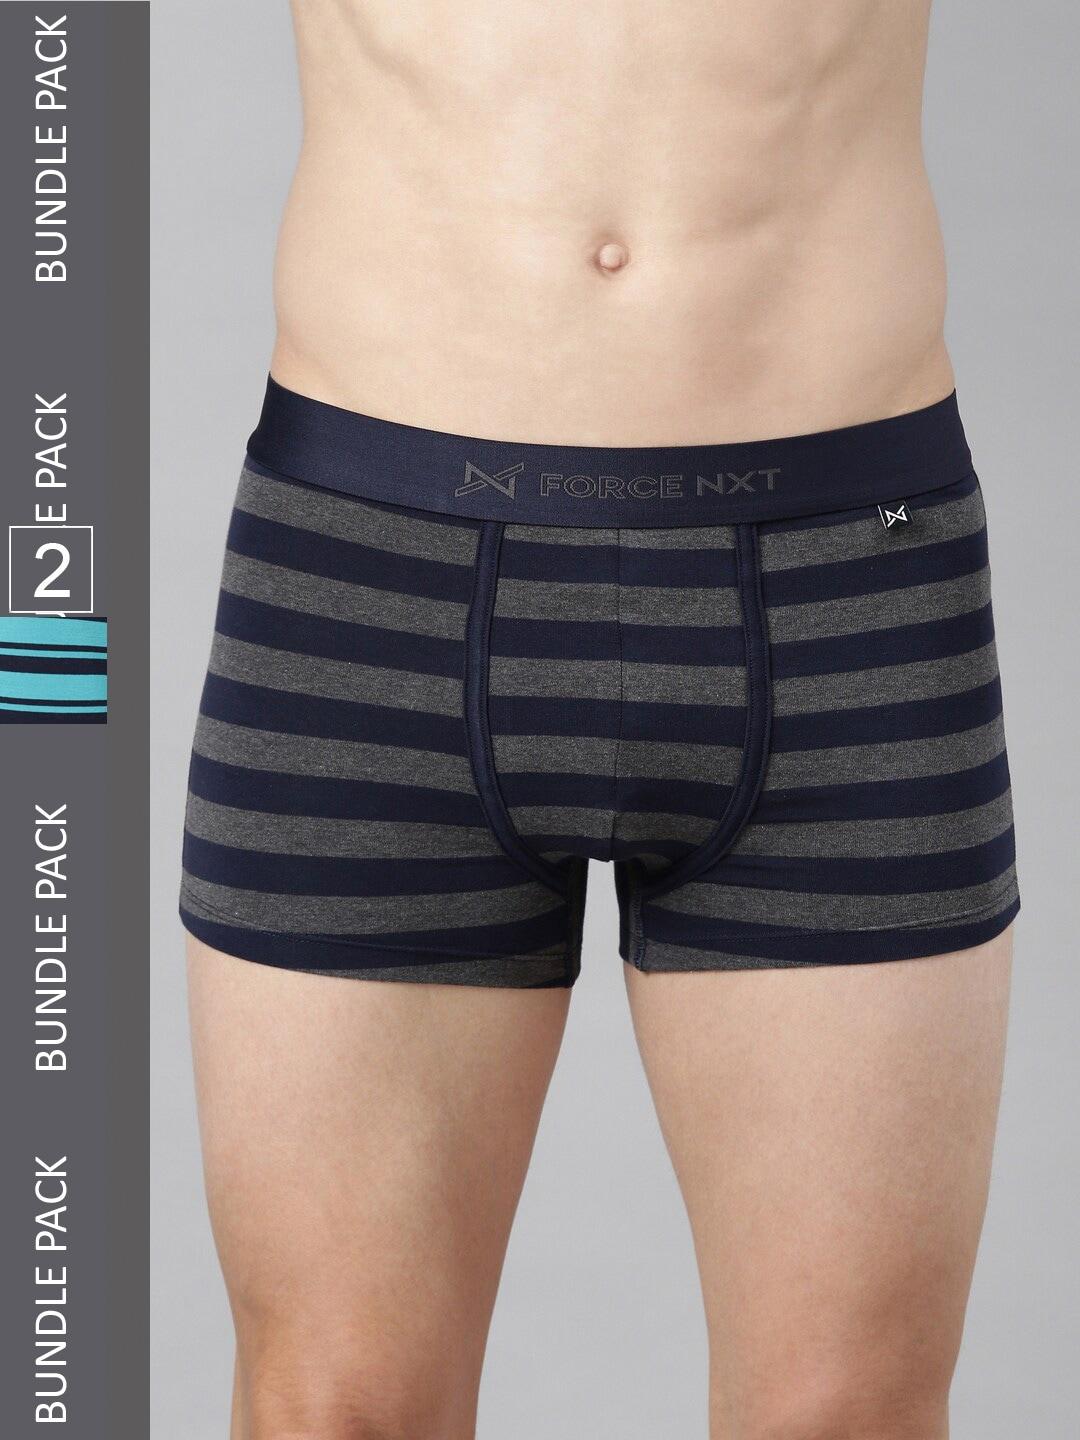 force nxt men assorted pack of 2 cotton trunks